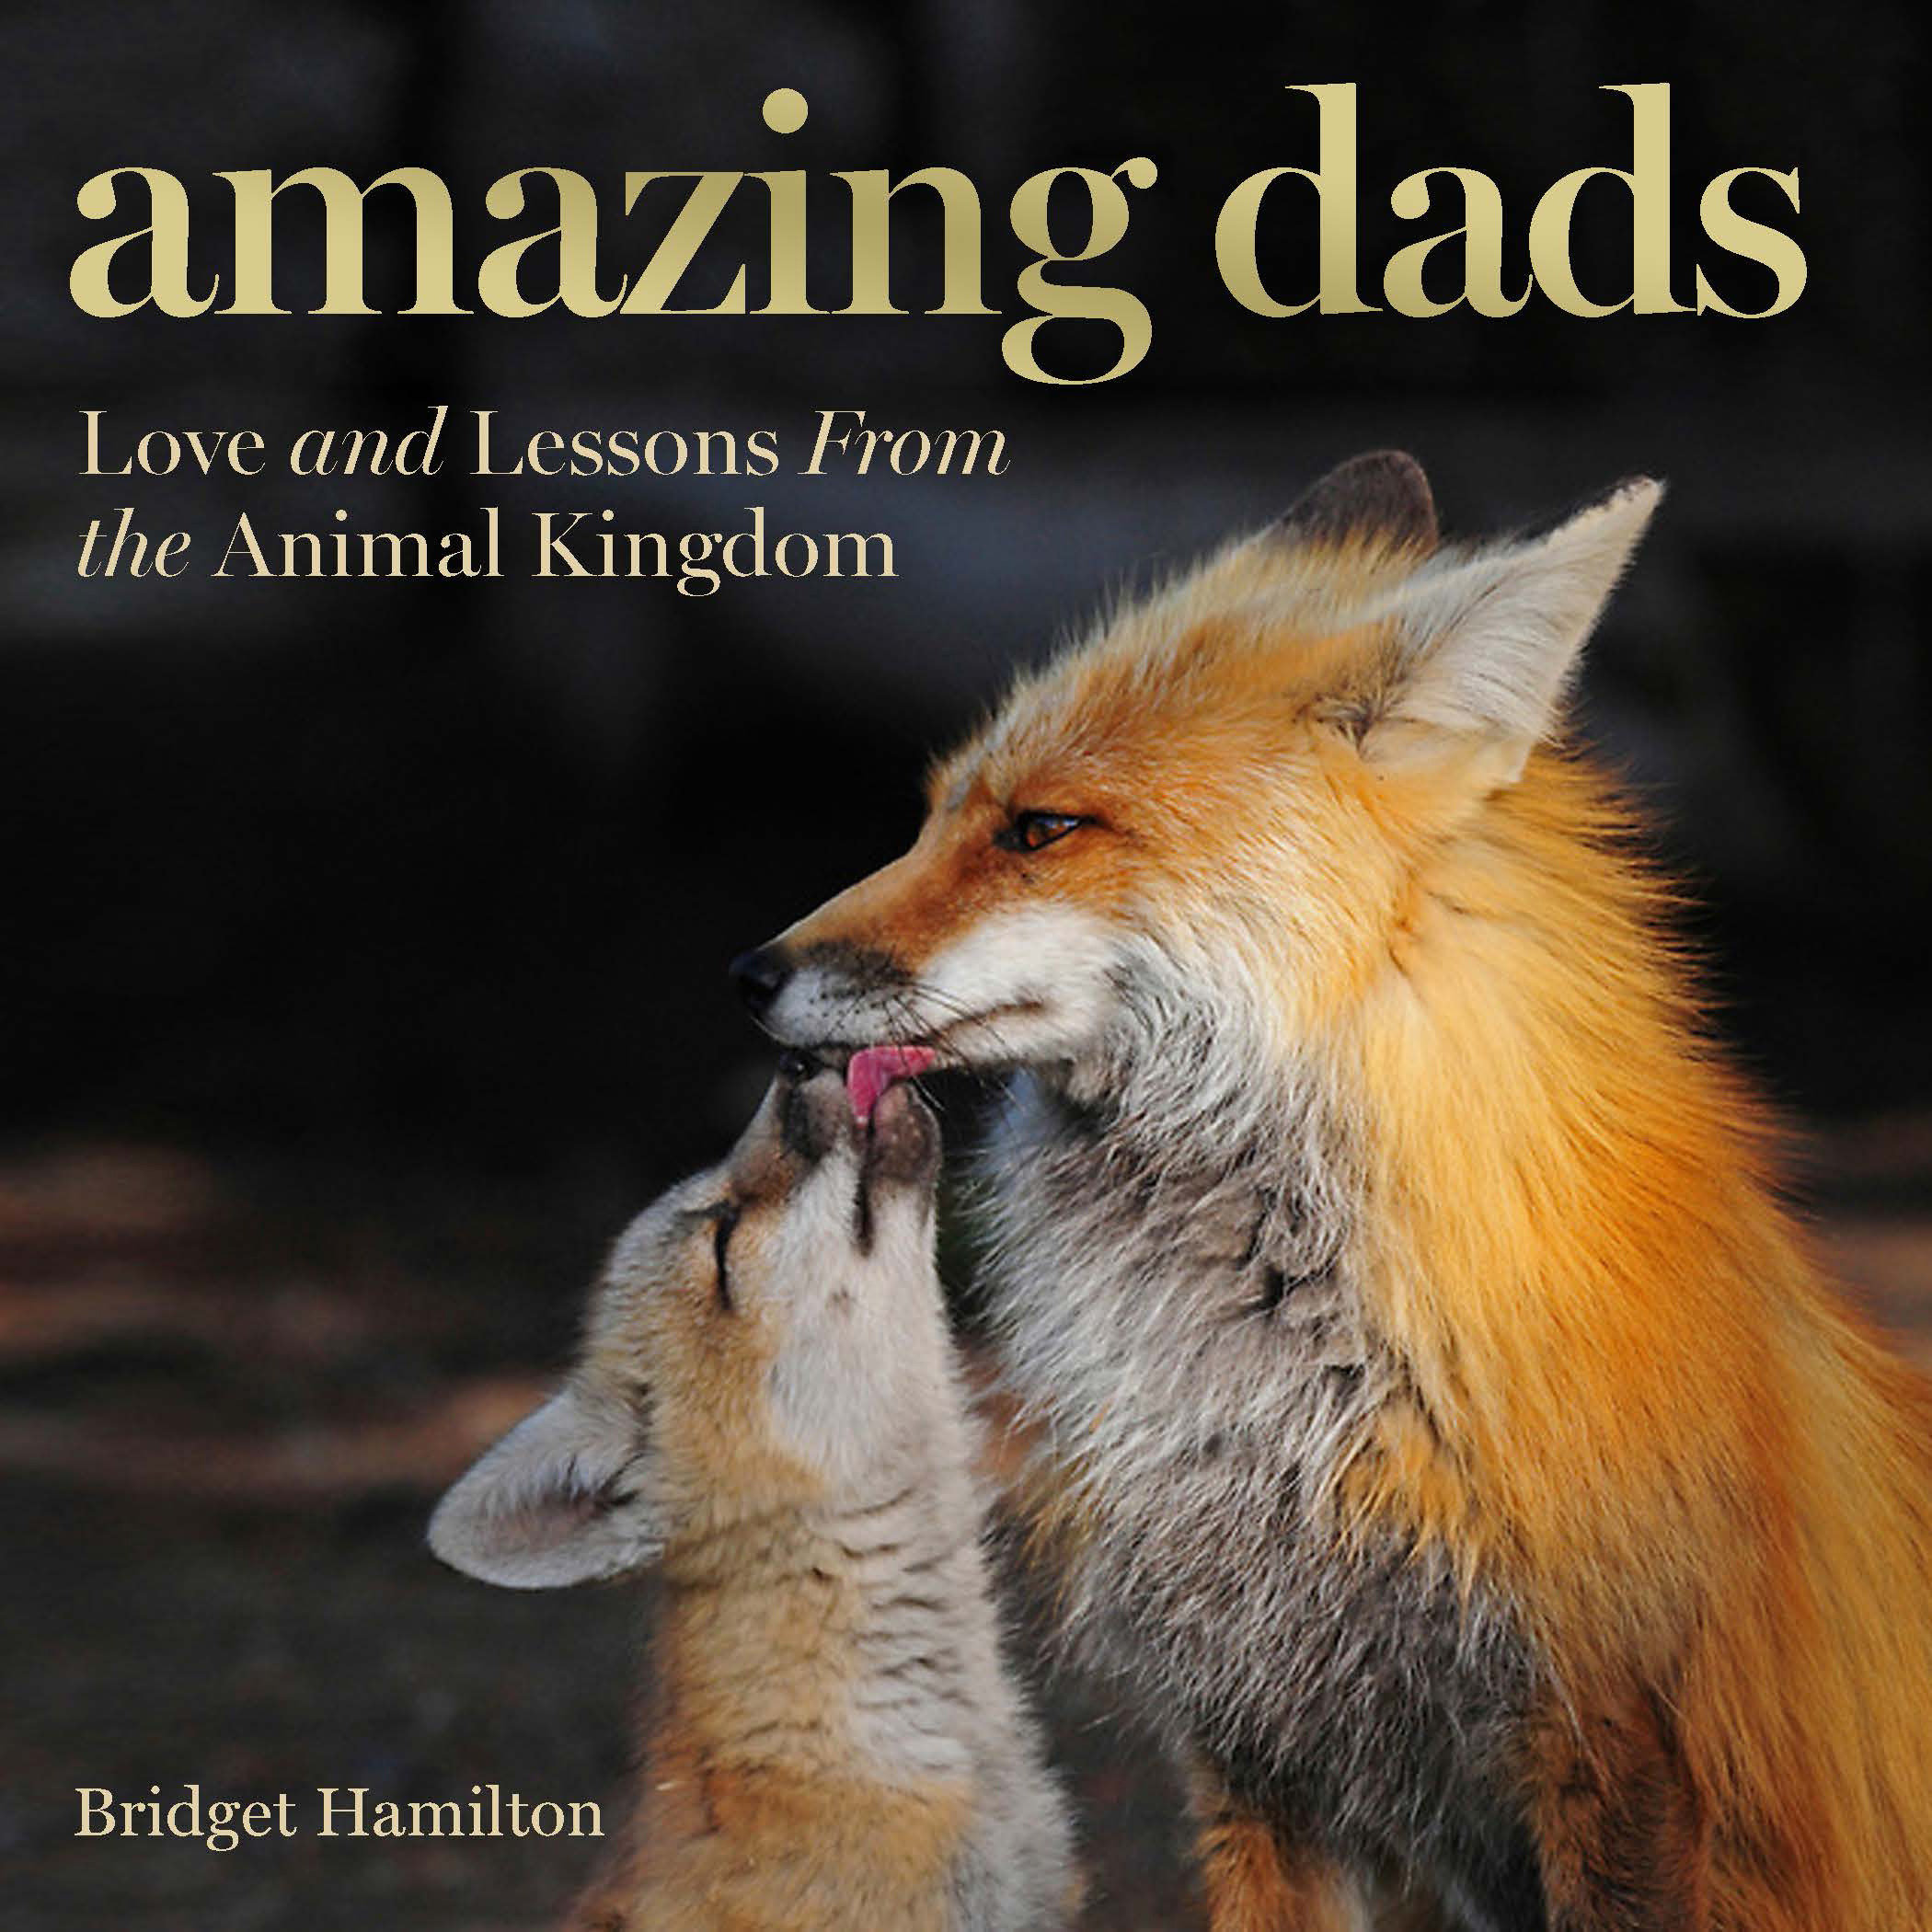 Amazing Dads (Hardcover Book)